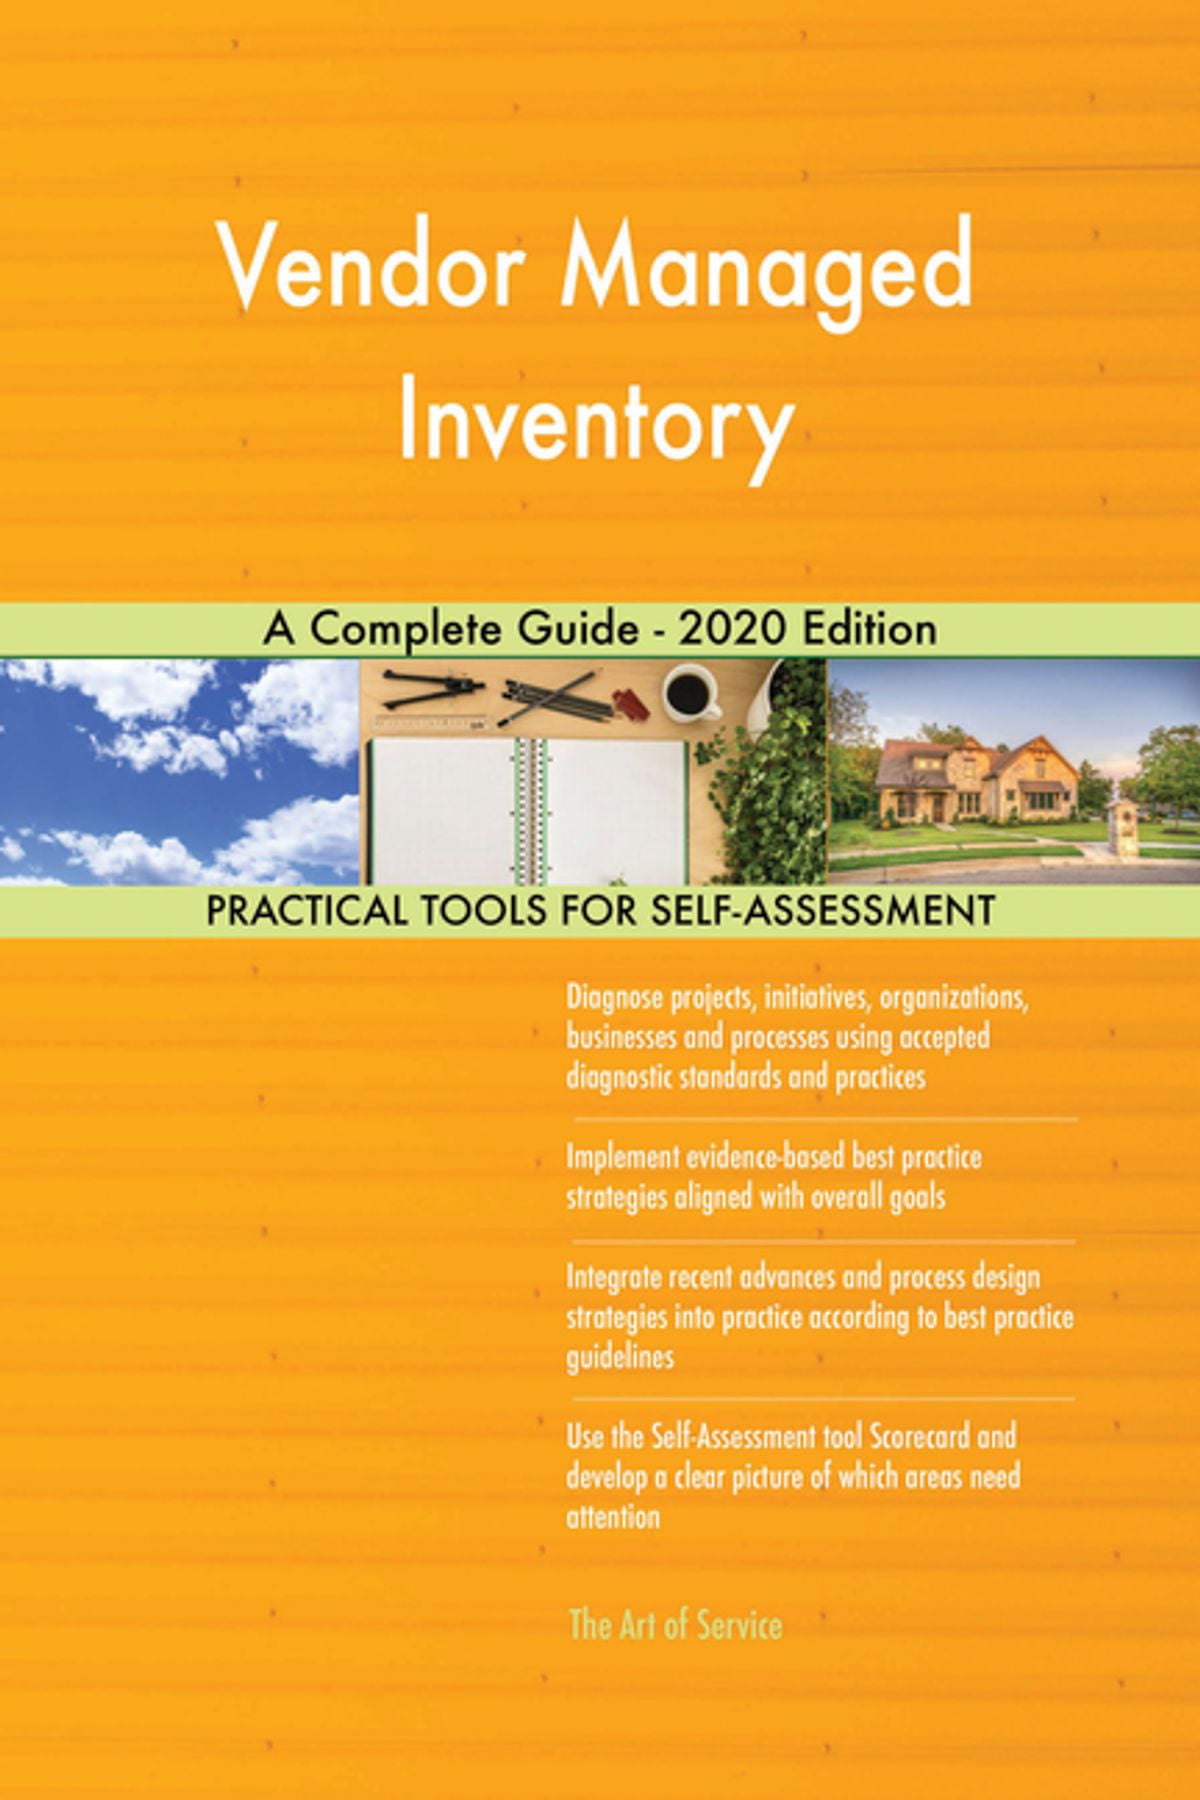 Vendor Managed Inventory A Complete Guide 2020 Edition eBook